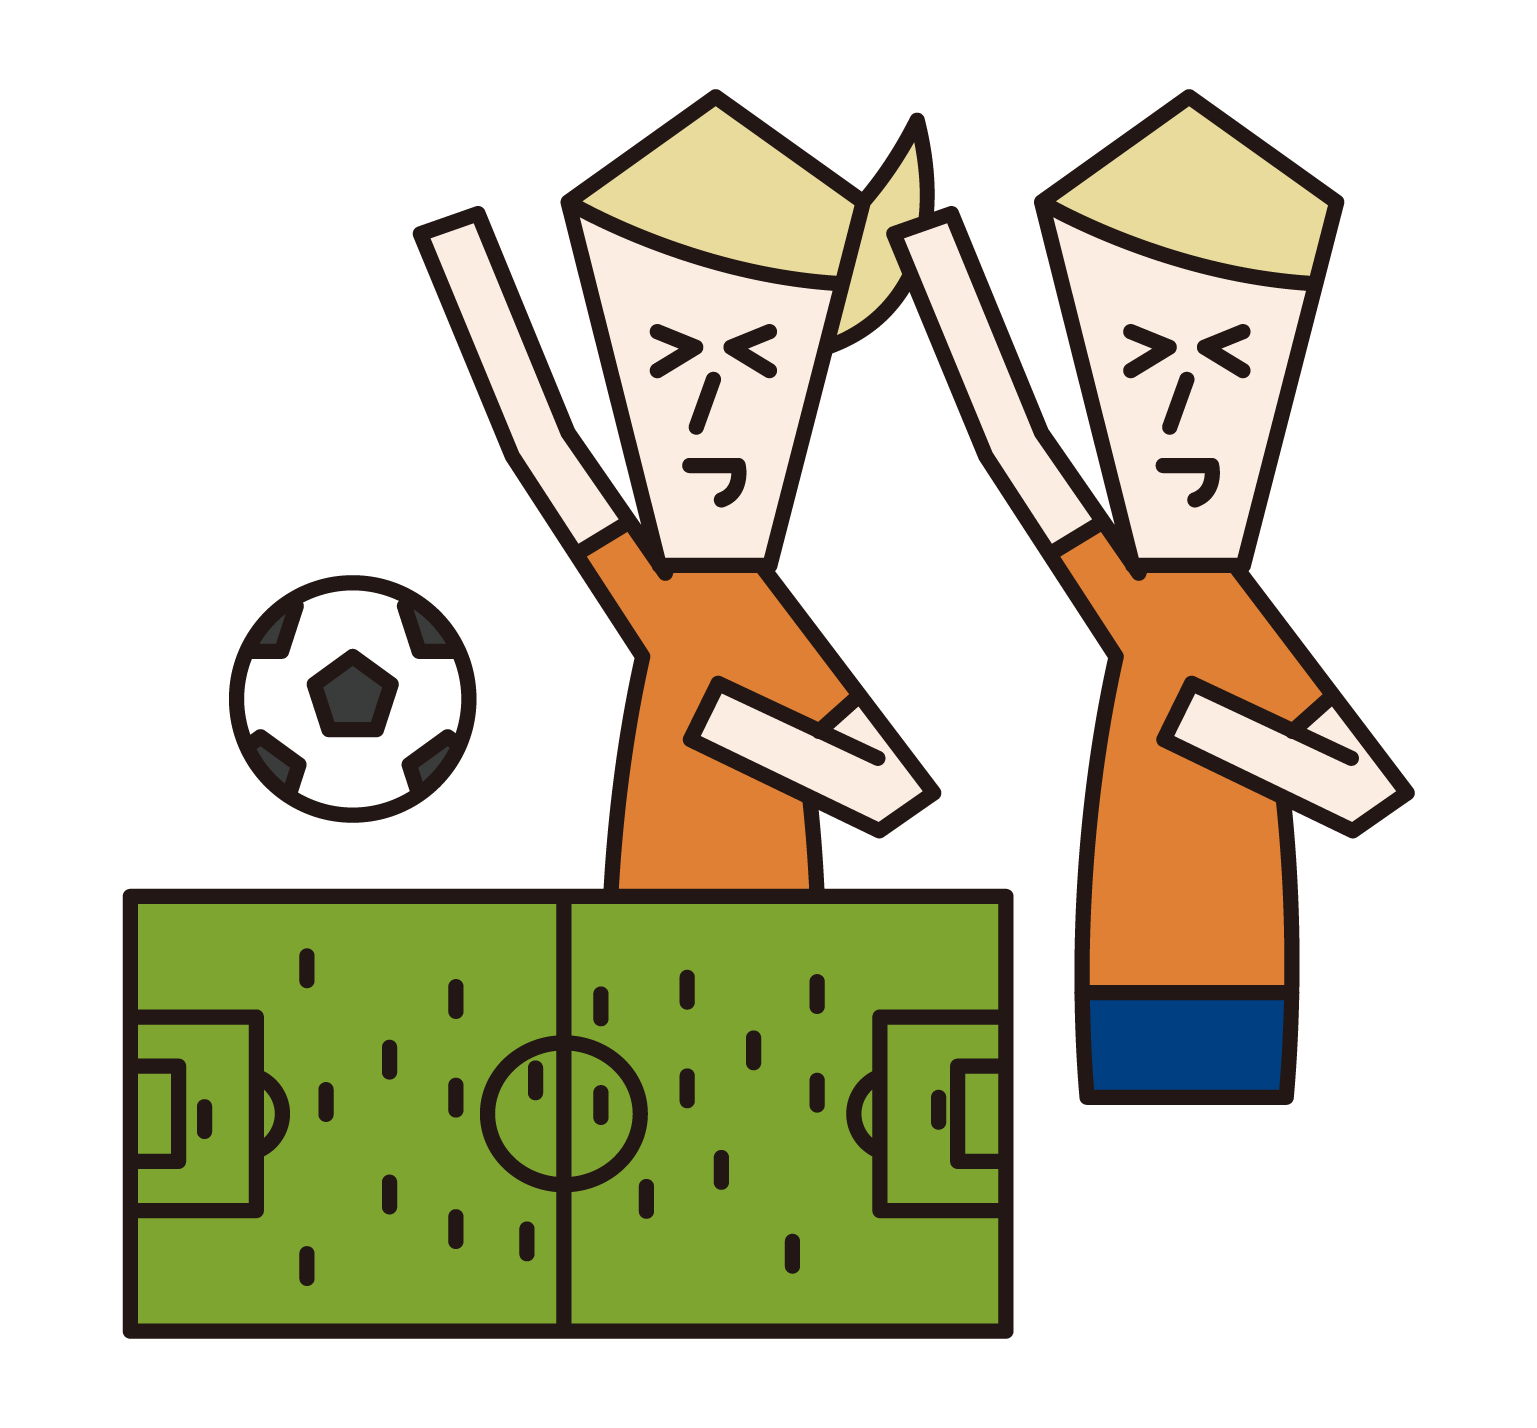 Illustration of people watching a soccer game